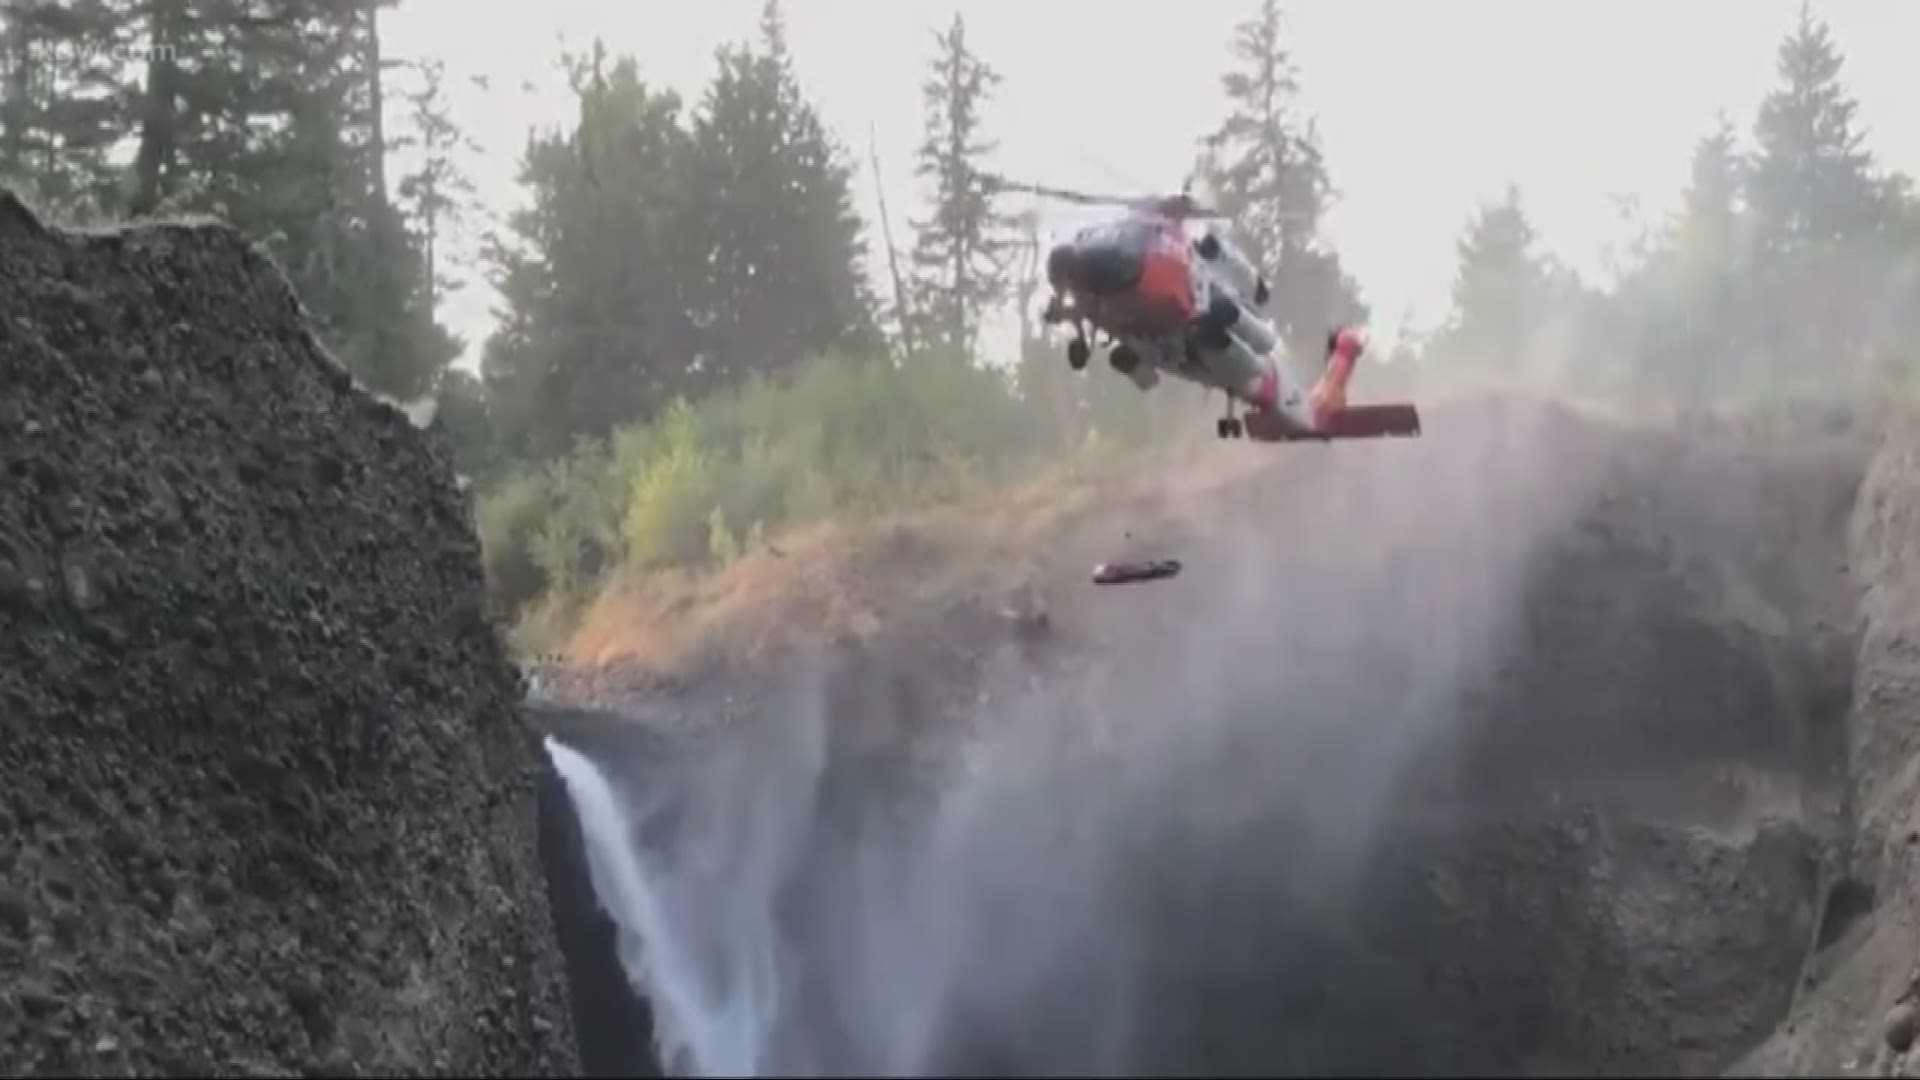 The U.S. Coast Guard rescued a man who jumped off a cliff in Washington.